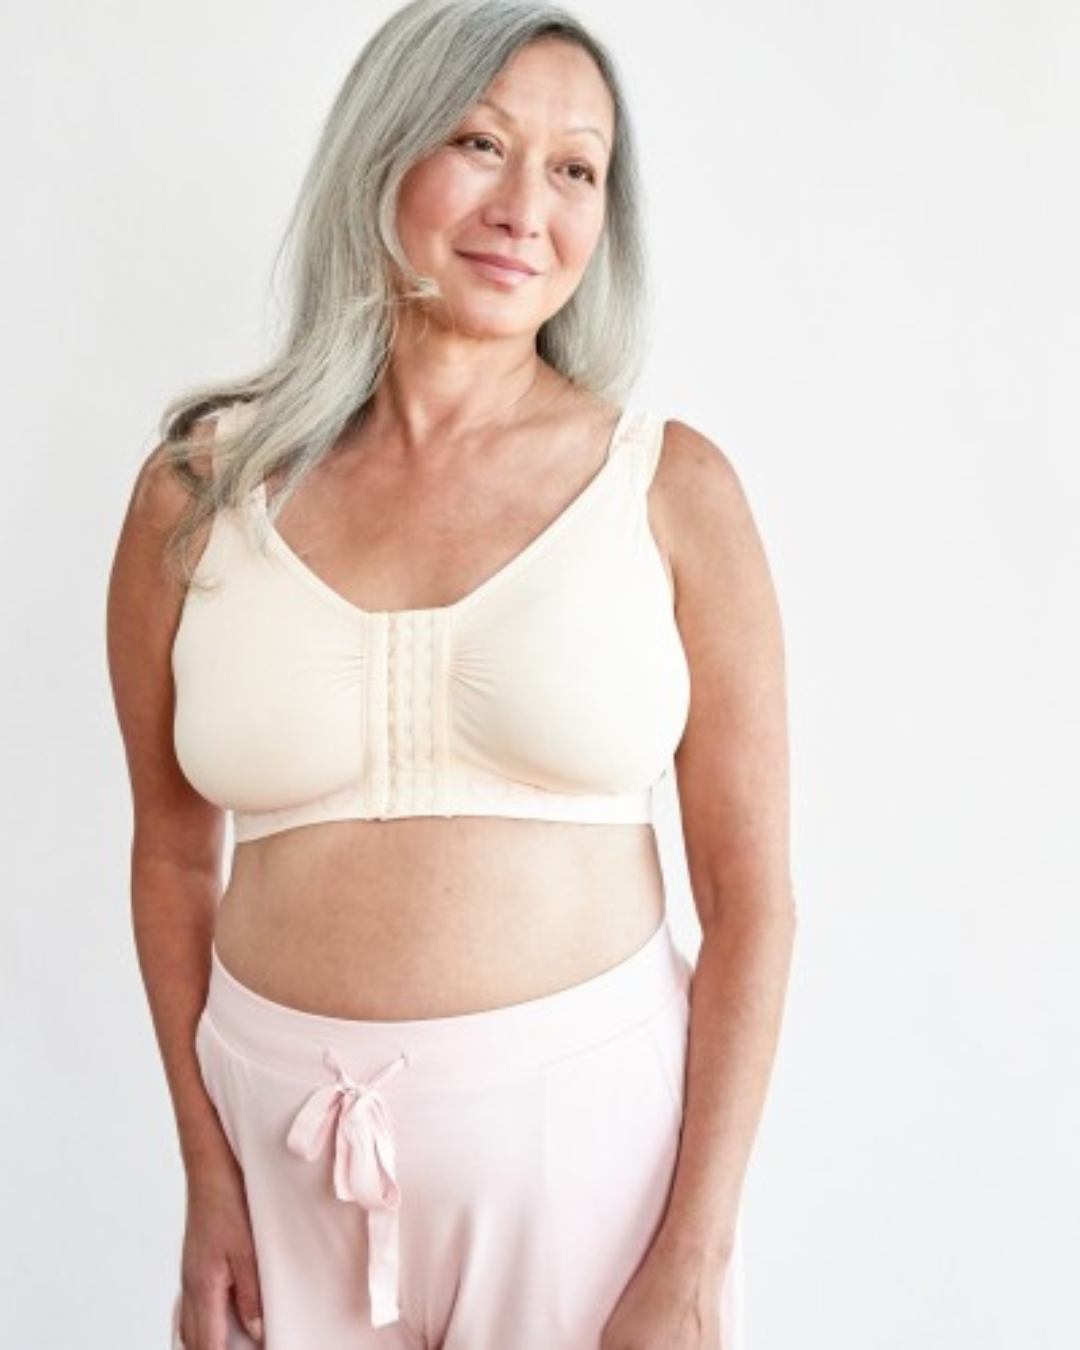 Shop our range of macom post surgery bras available on our website